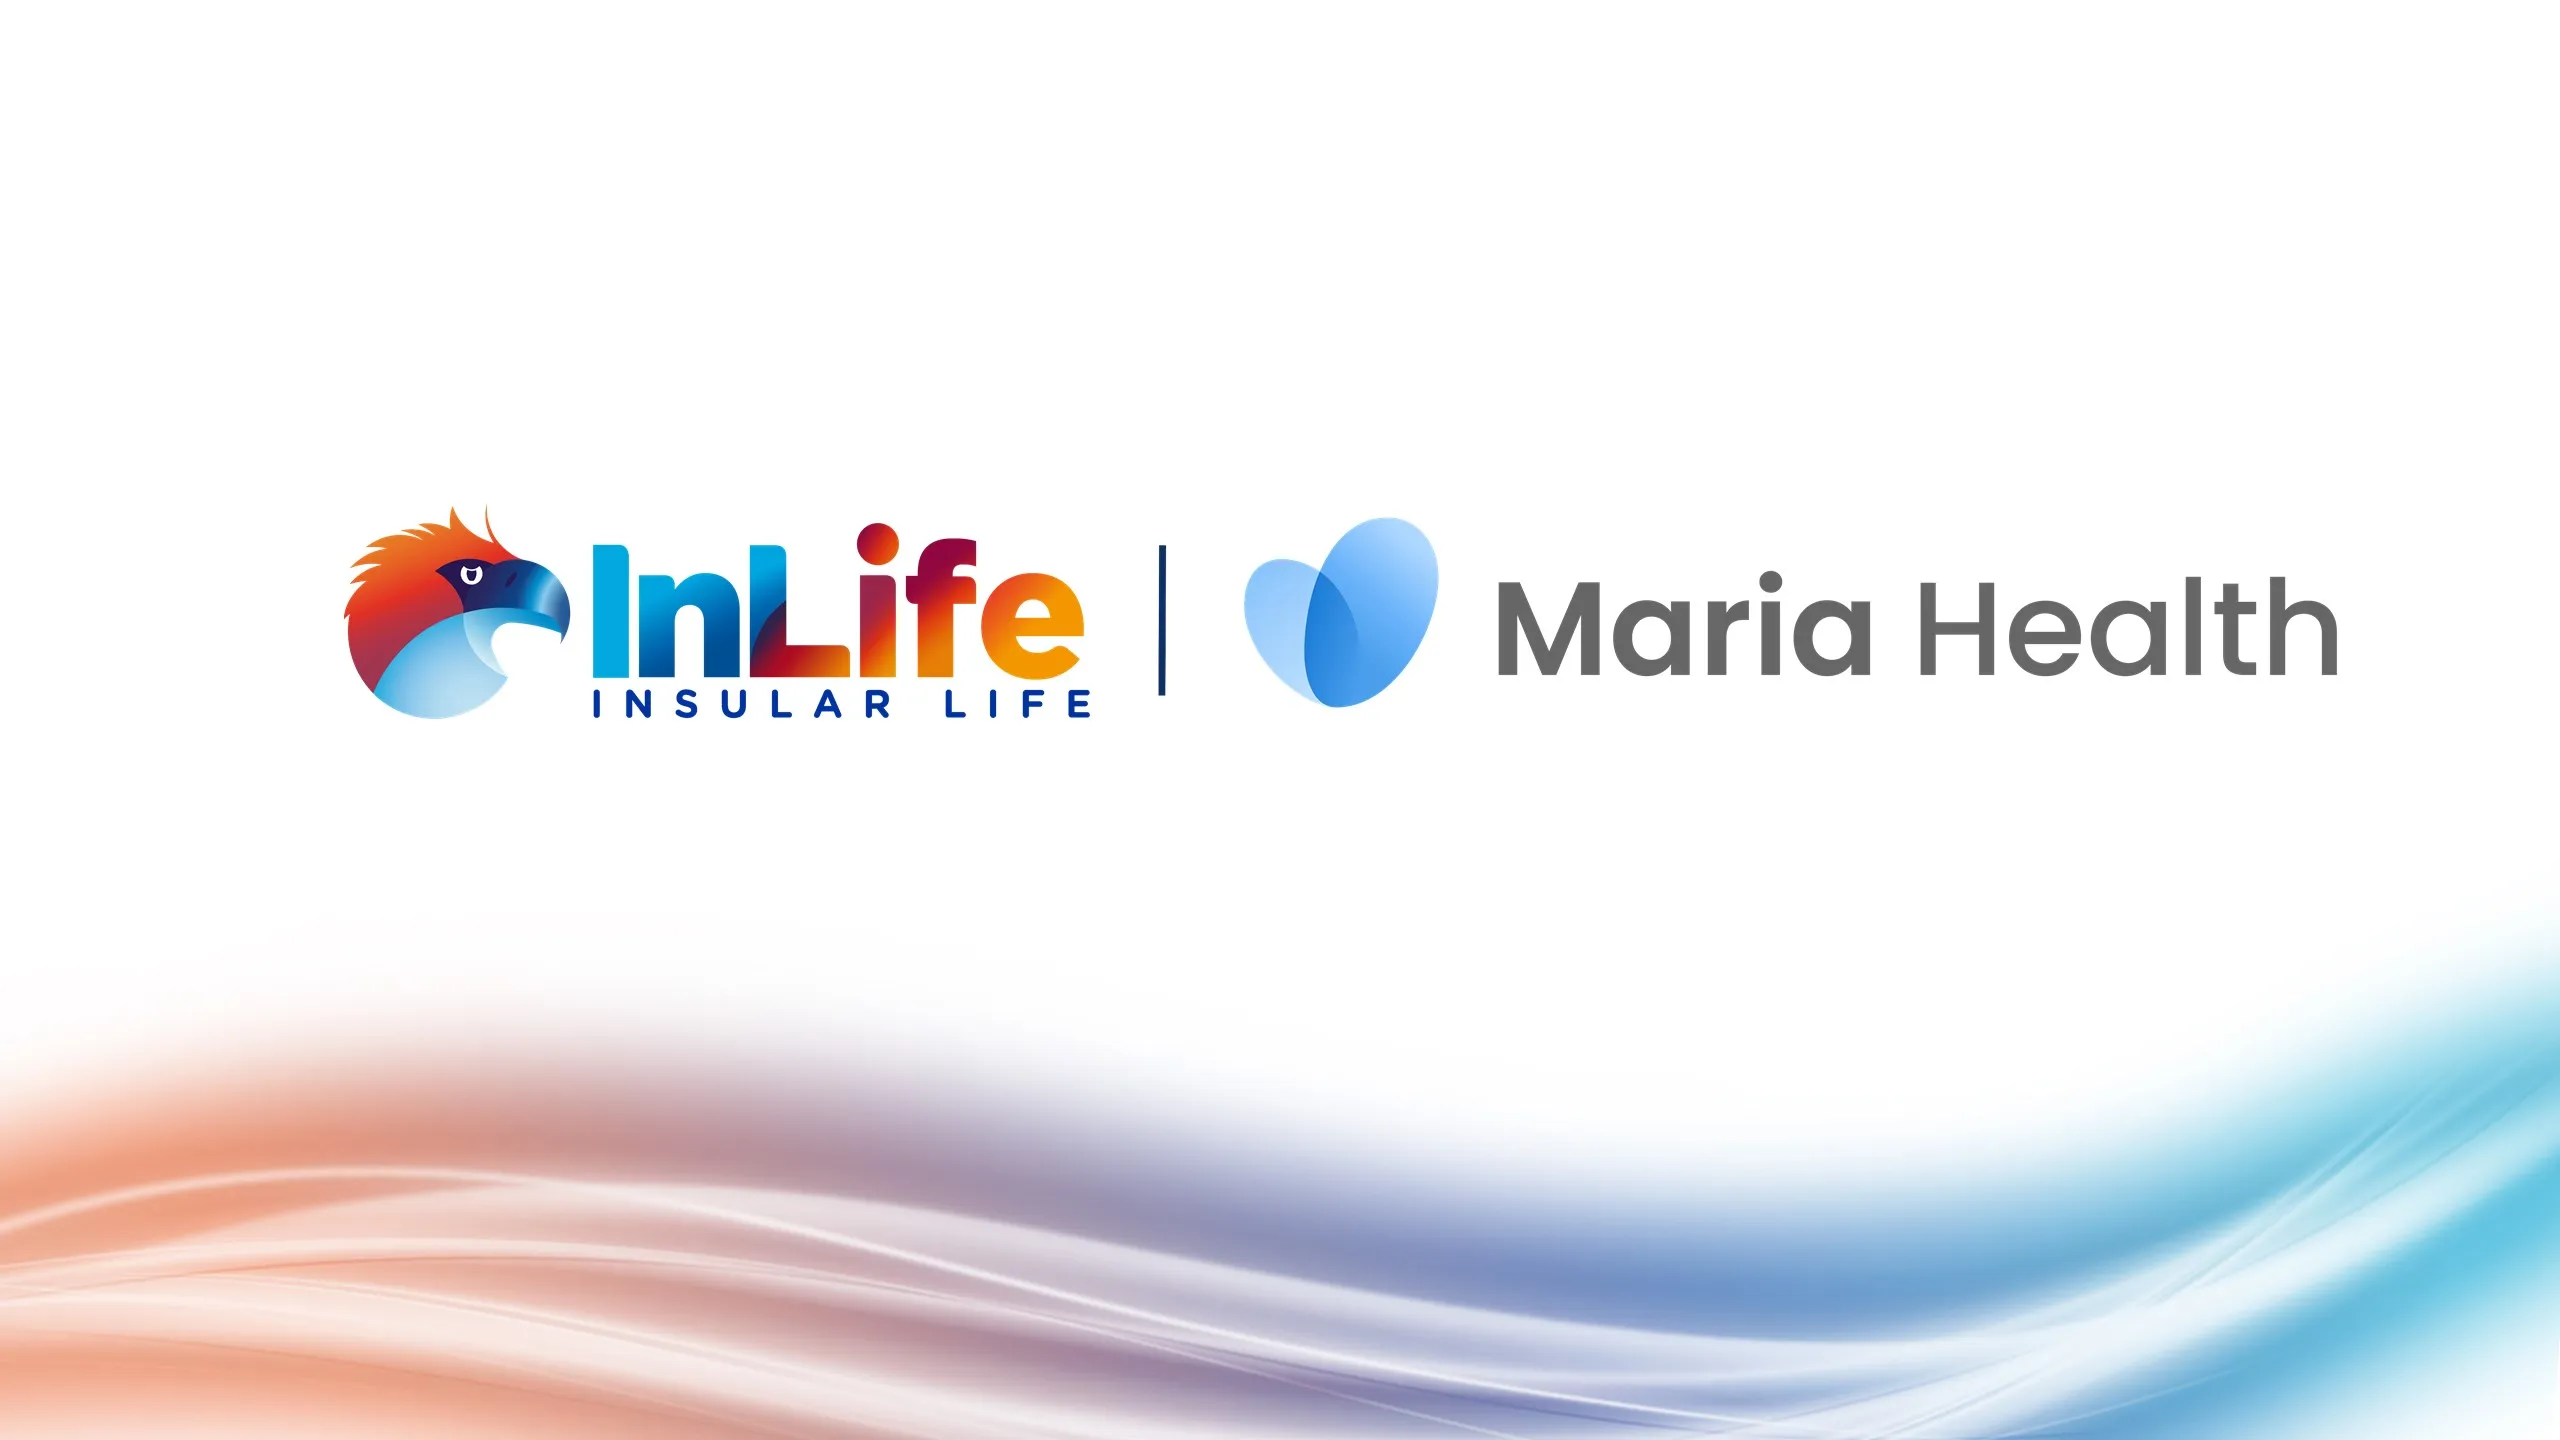 insular-life-invests-in-rising-tech-company-maria-health-to-accelerate-digital-adoption-promote-financial-inclusion